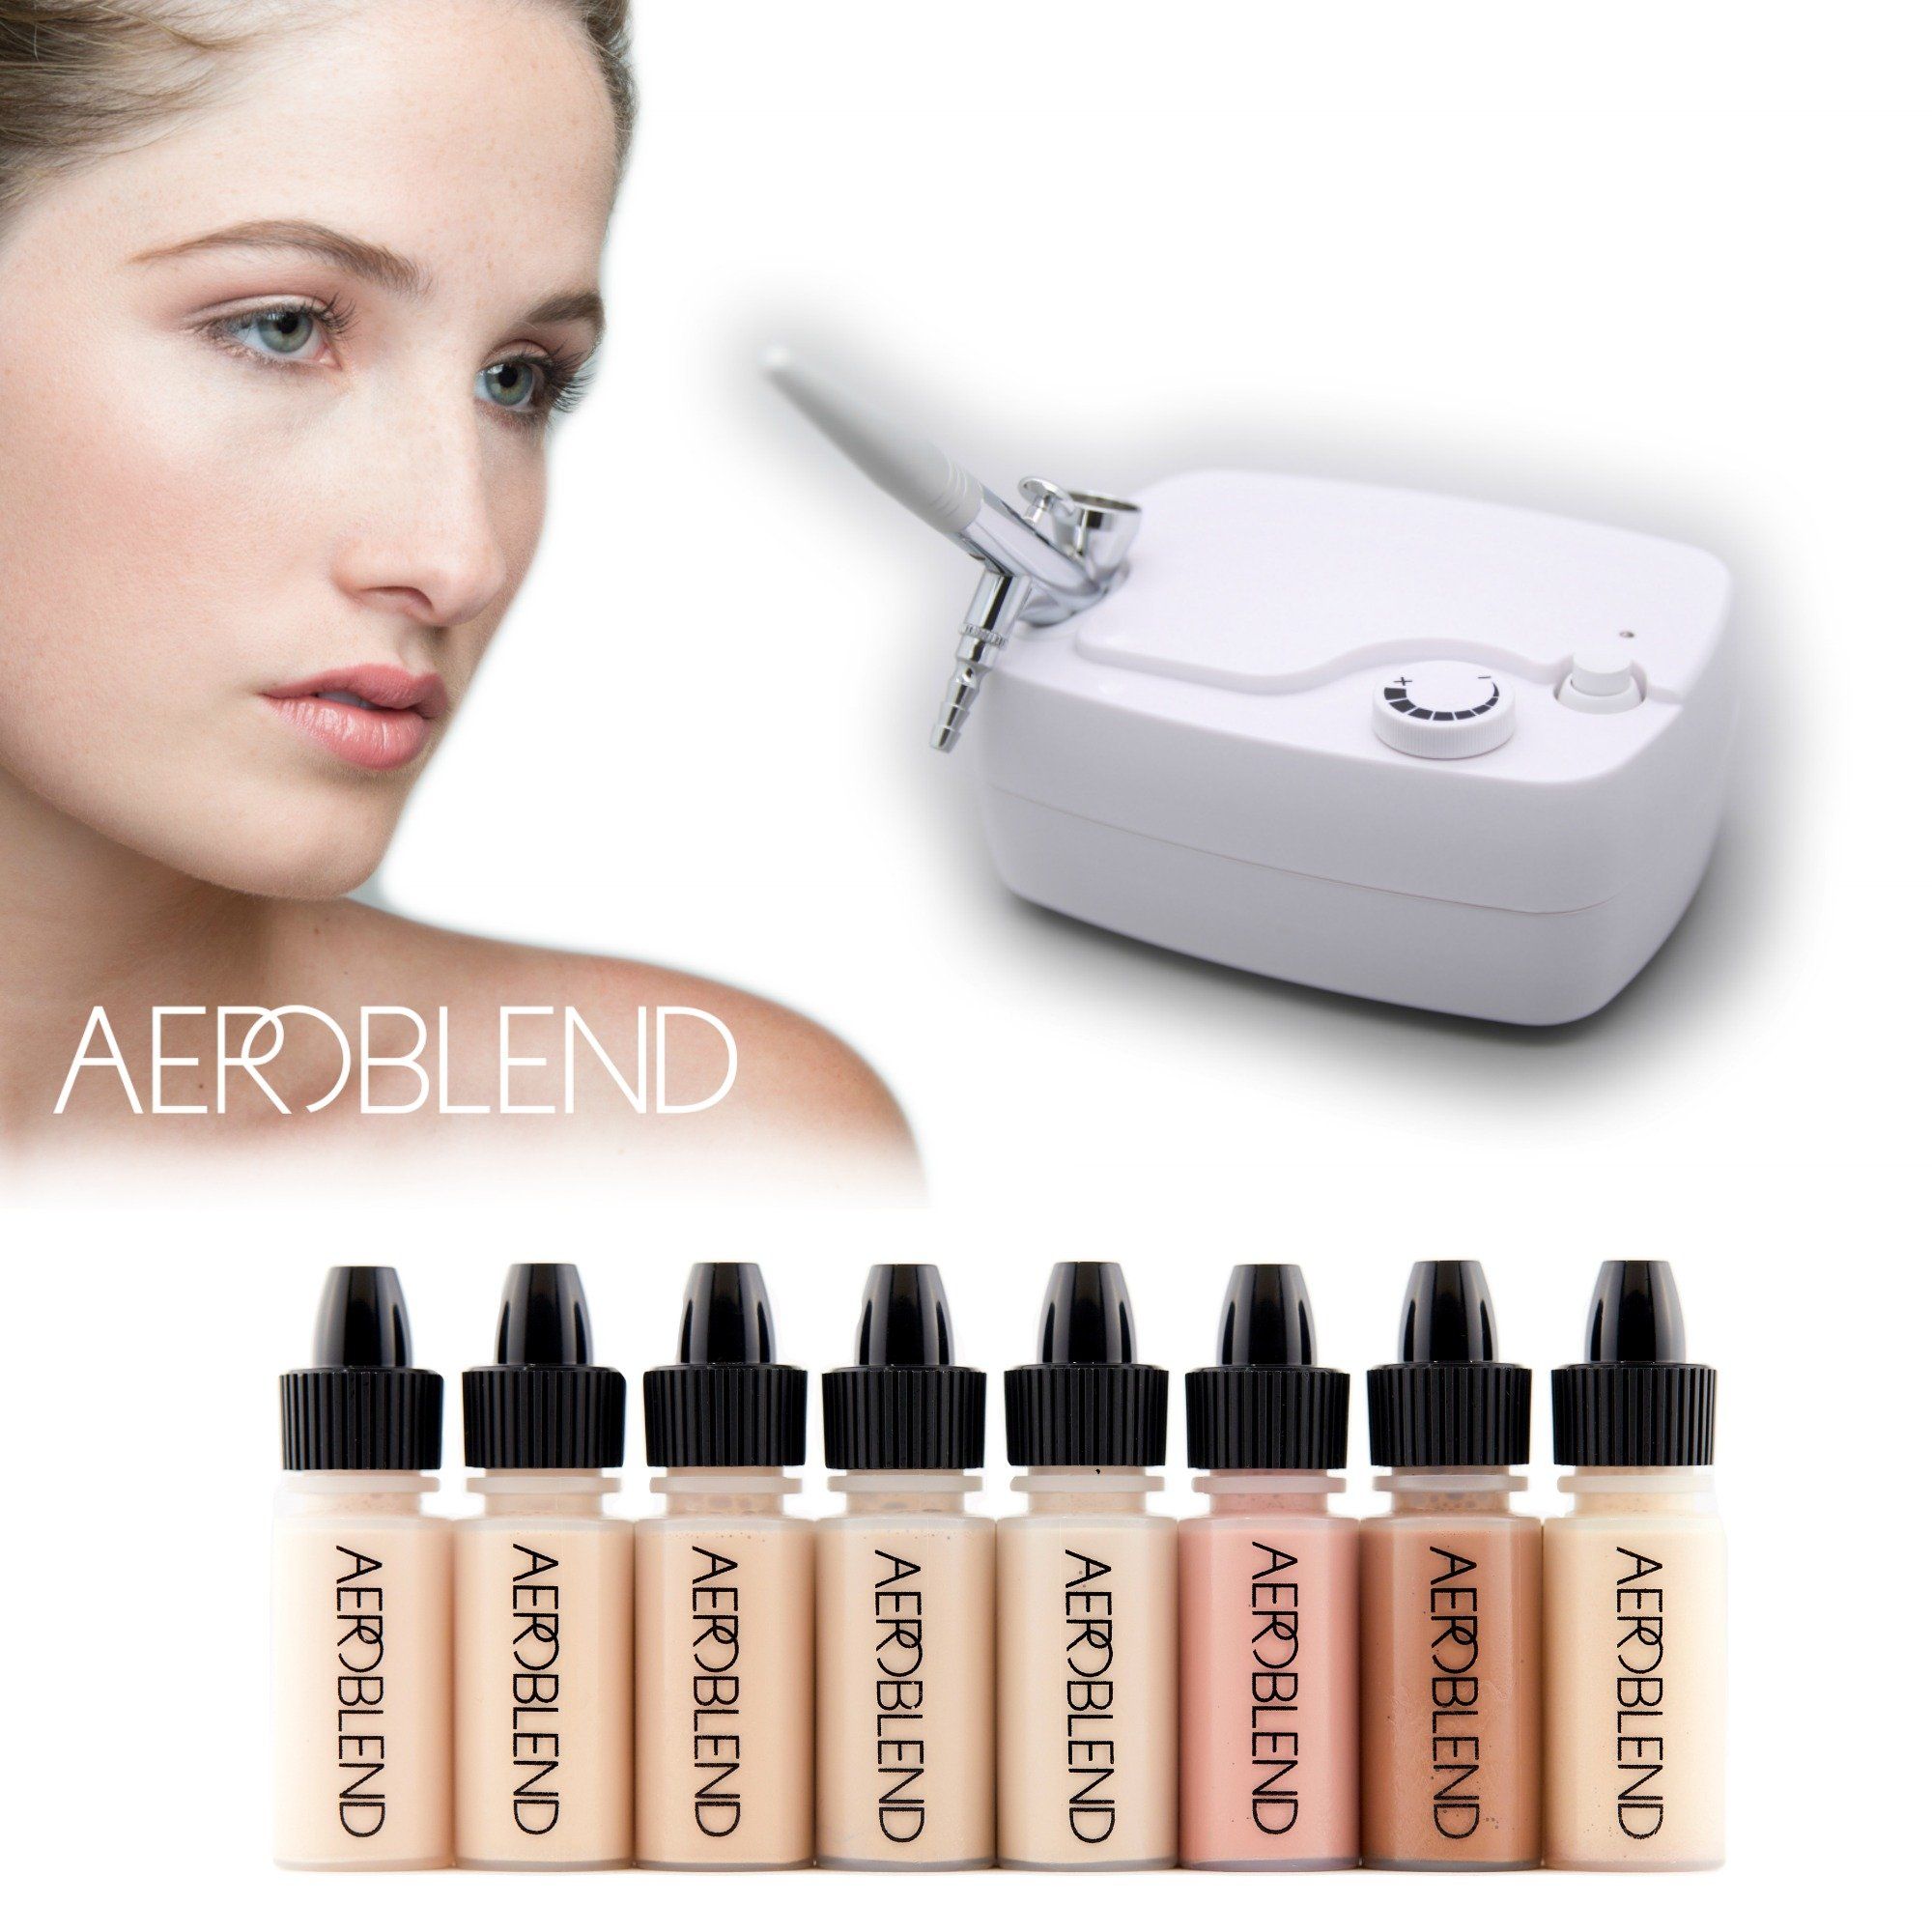 10 Best Airbrush Makeup Kits Of 2022